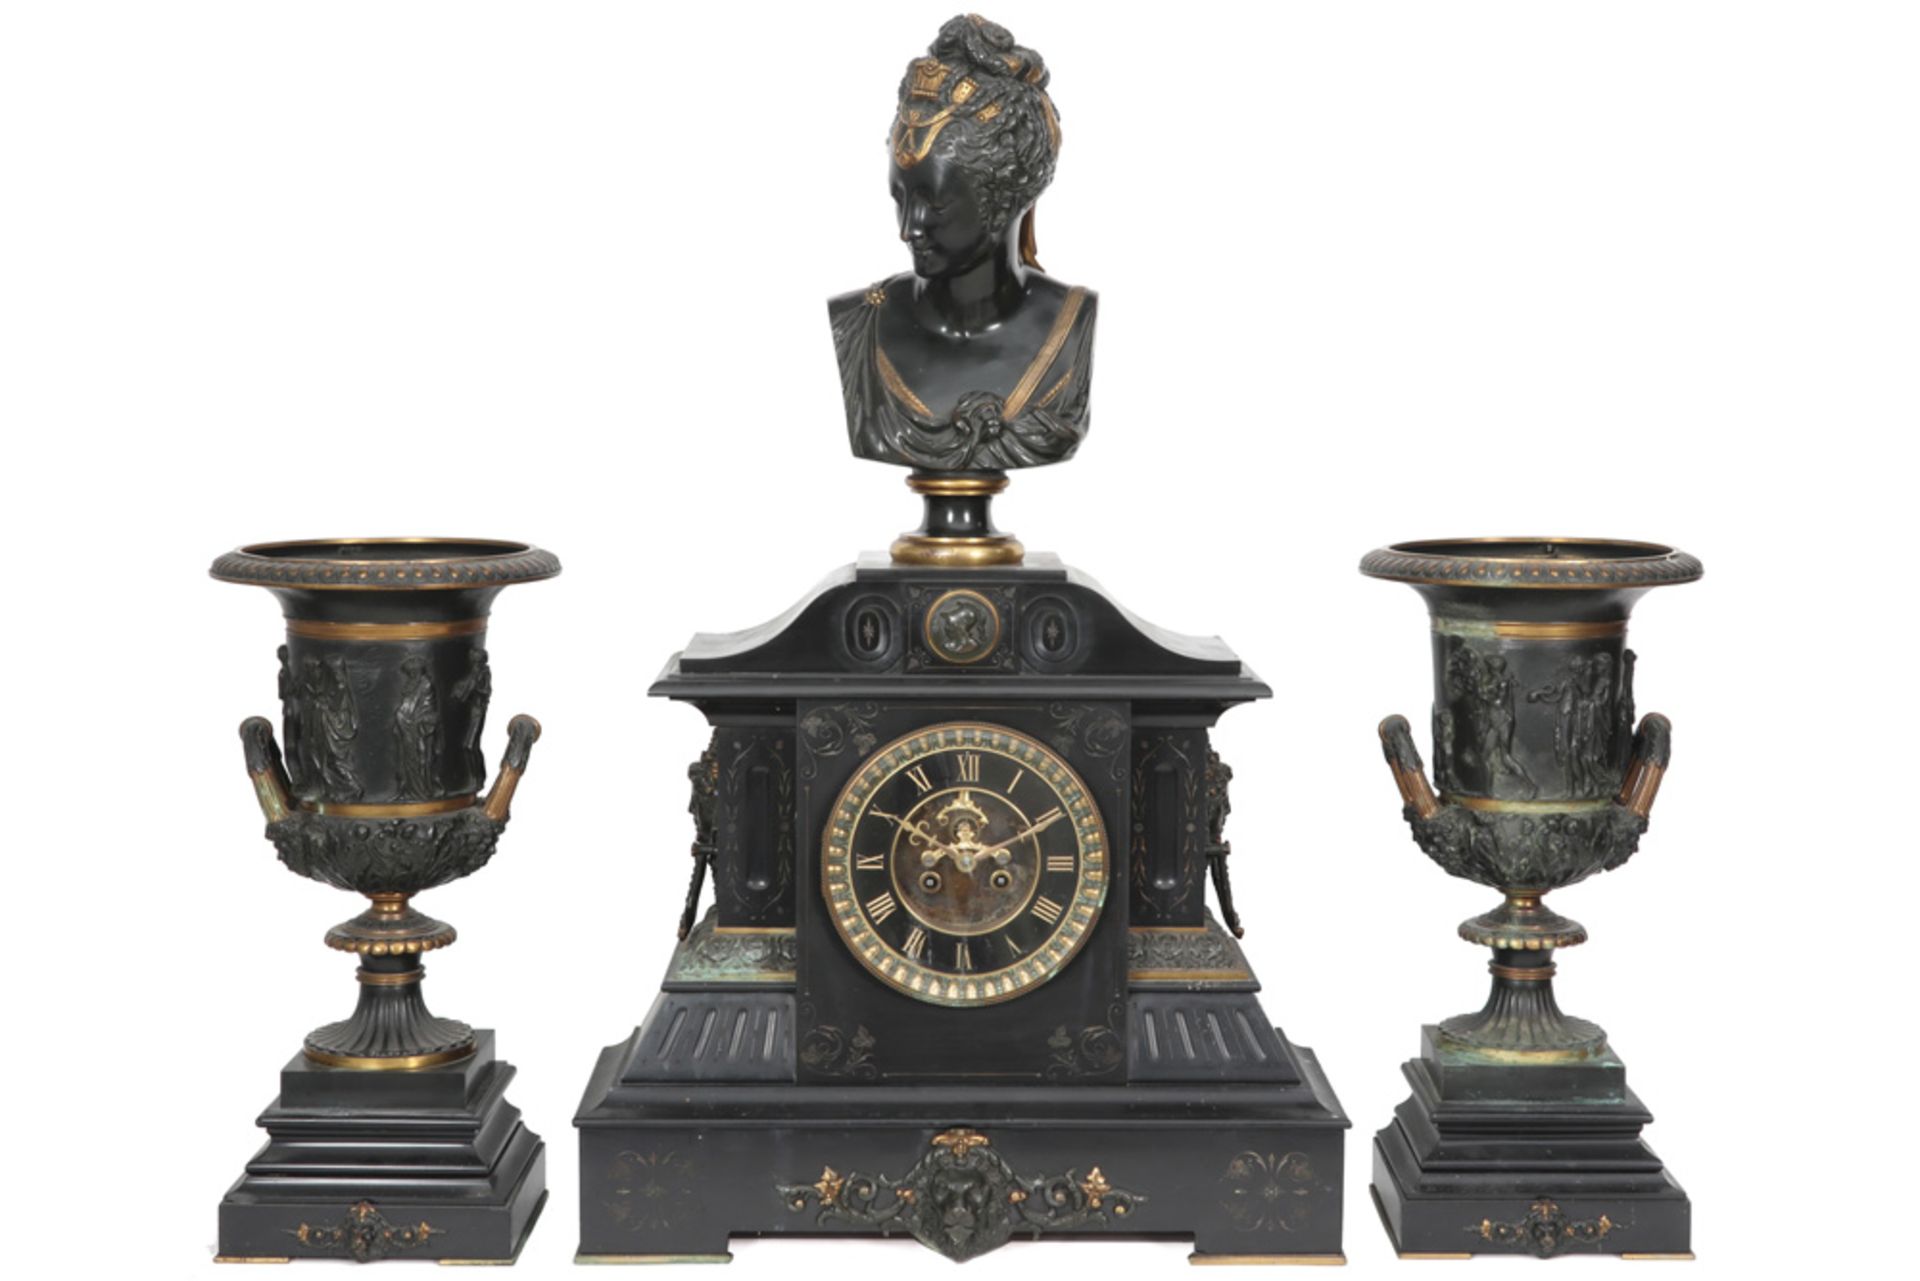 antique neoclassical French garniture in black marble and bronze with a pair of urns and a clock (